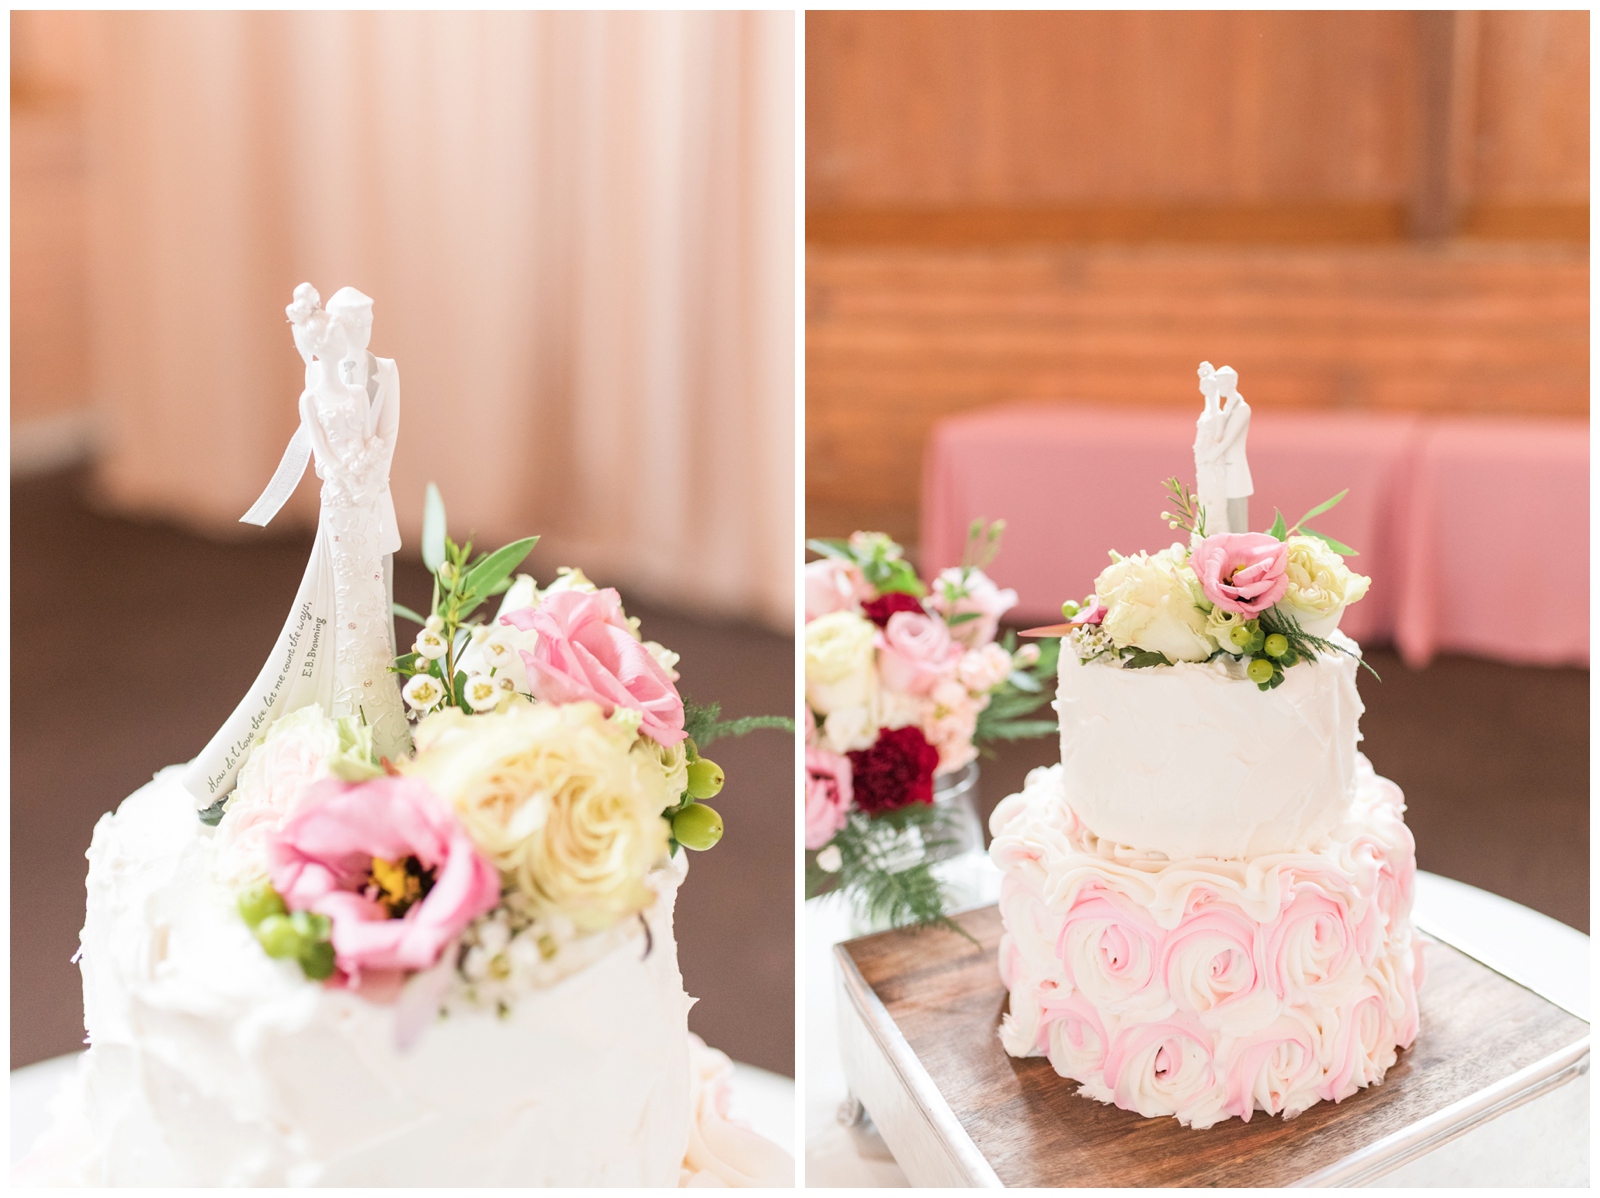 classic blush and ivory wedding Irongate equestrian center wedding cake with pink flowers 